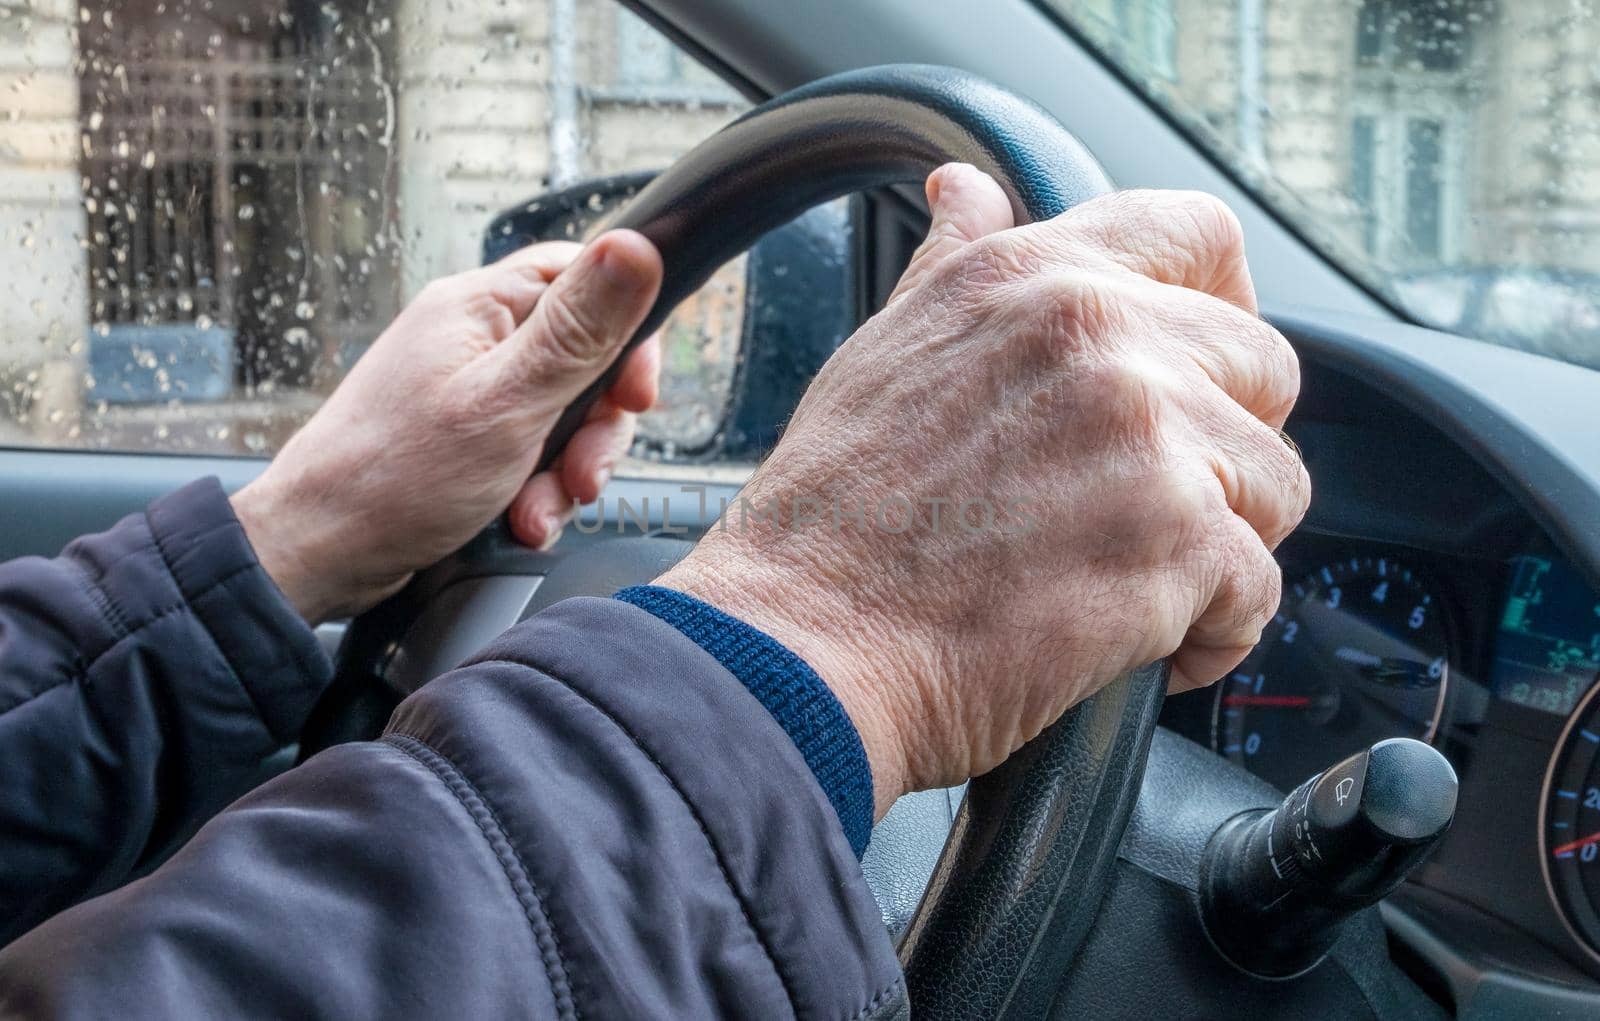 Close-up of the hand of an adult man in a passenger car, holding the steering wheel in cold rainy weather in the city. The man is driving the car.